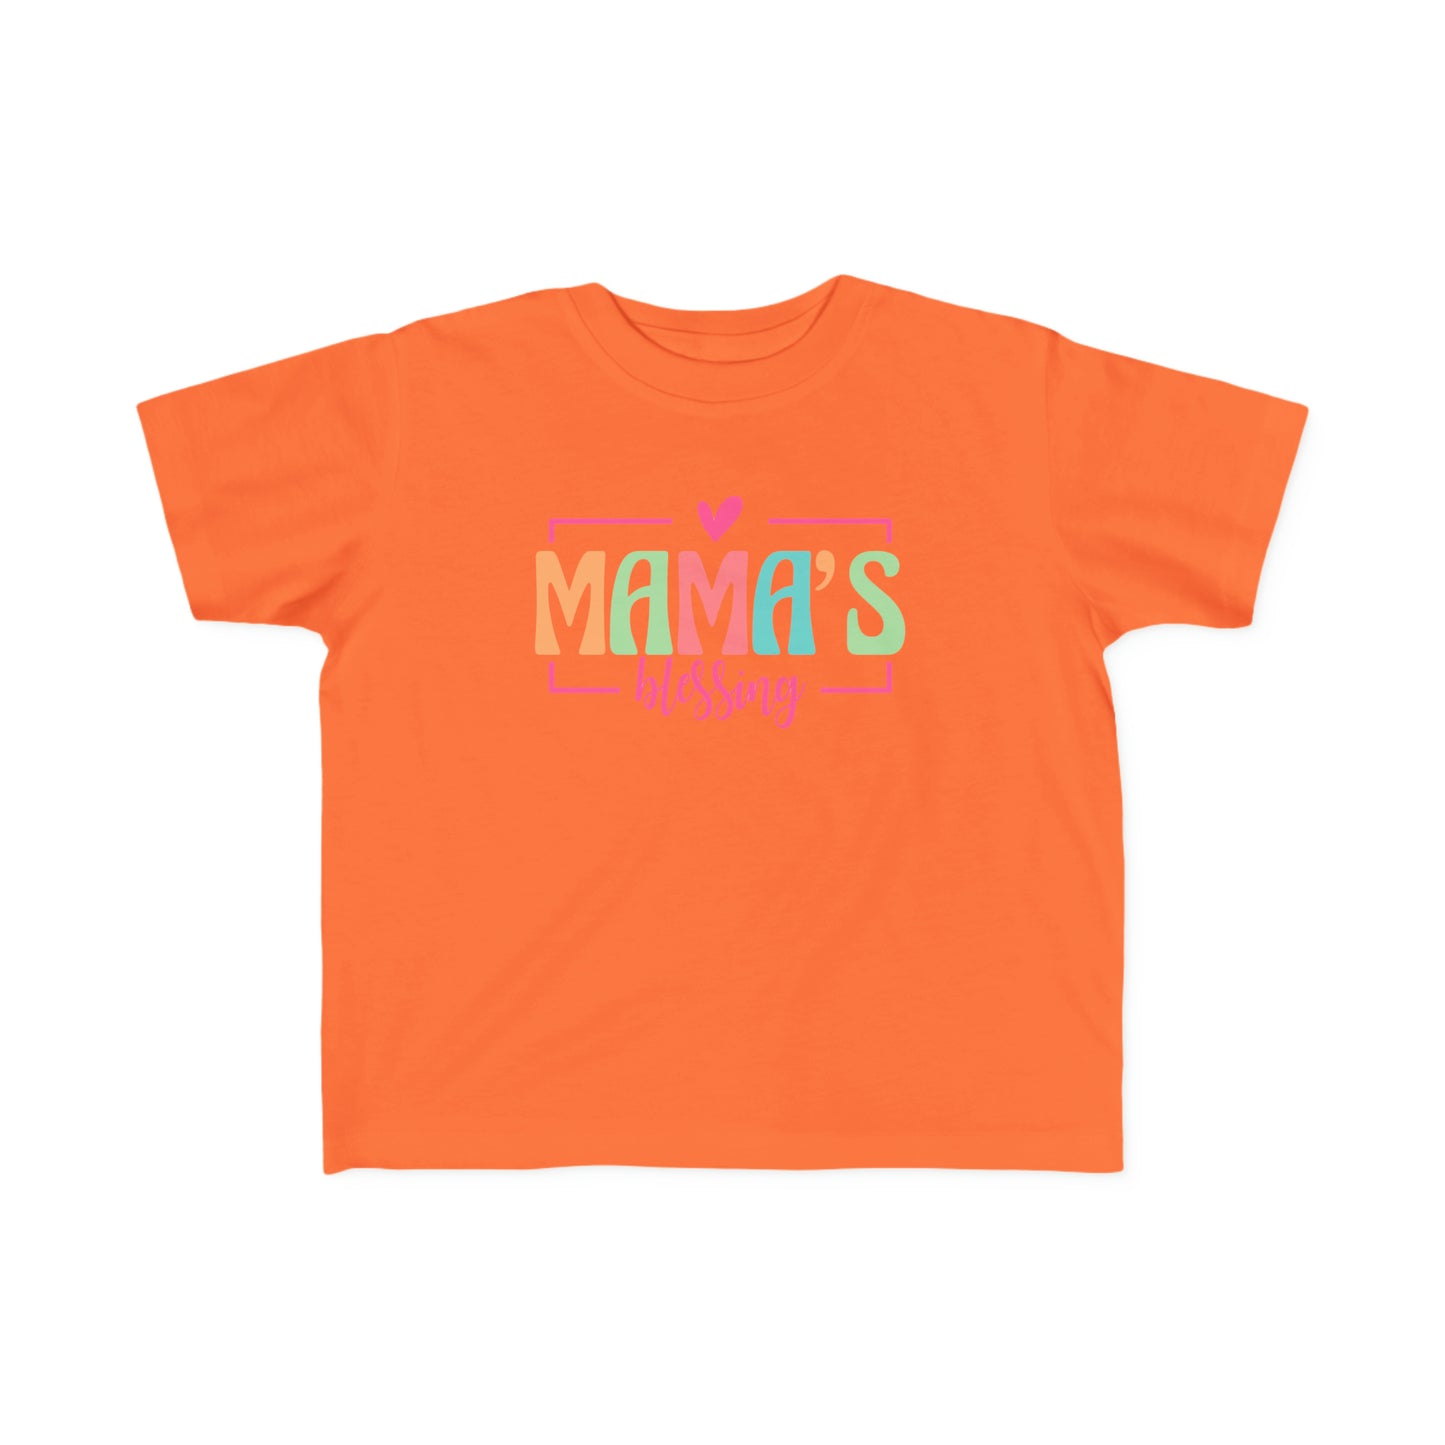 Copy of Chaos Creator Toddler's Fine Jersey Tee